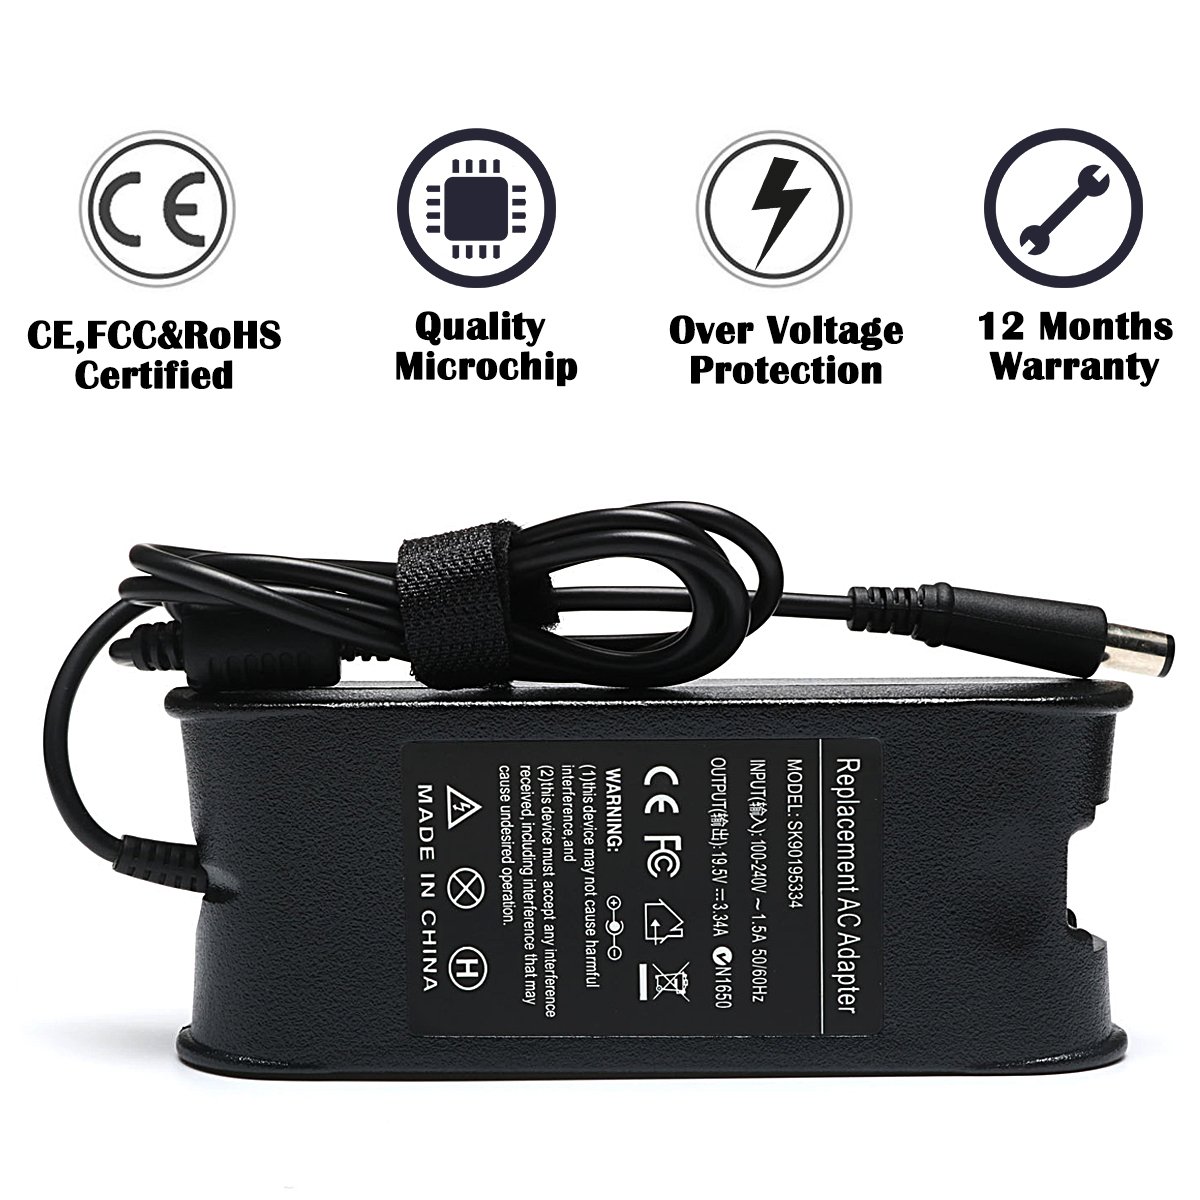 Mua 65W Laptop Charger Compatible for Dell Latitude E6430 E6230 E6320 E6410  E6420 7480 7280 5480 E7470 E7450 E7440 E5470 Charger Power Supply Cord  09RN2C 9T215 7W104 5U092 XD733 Charger trên Amazon